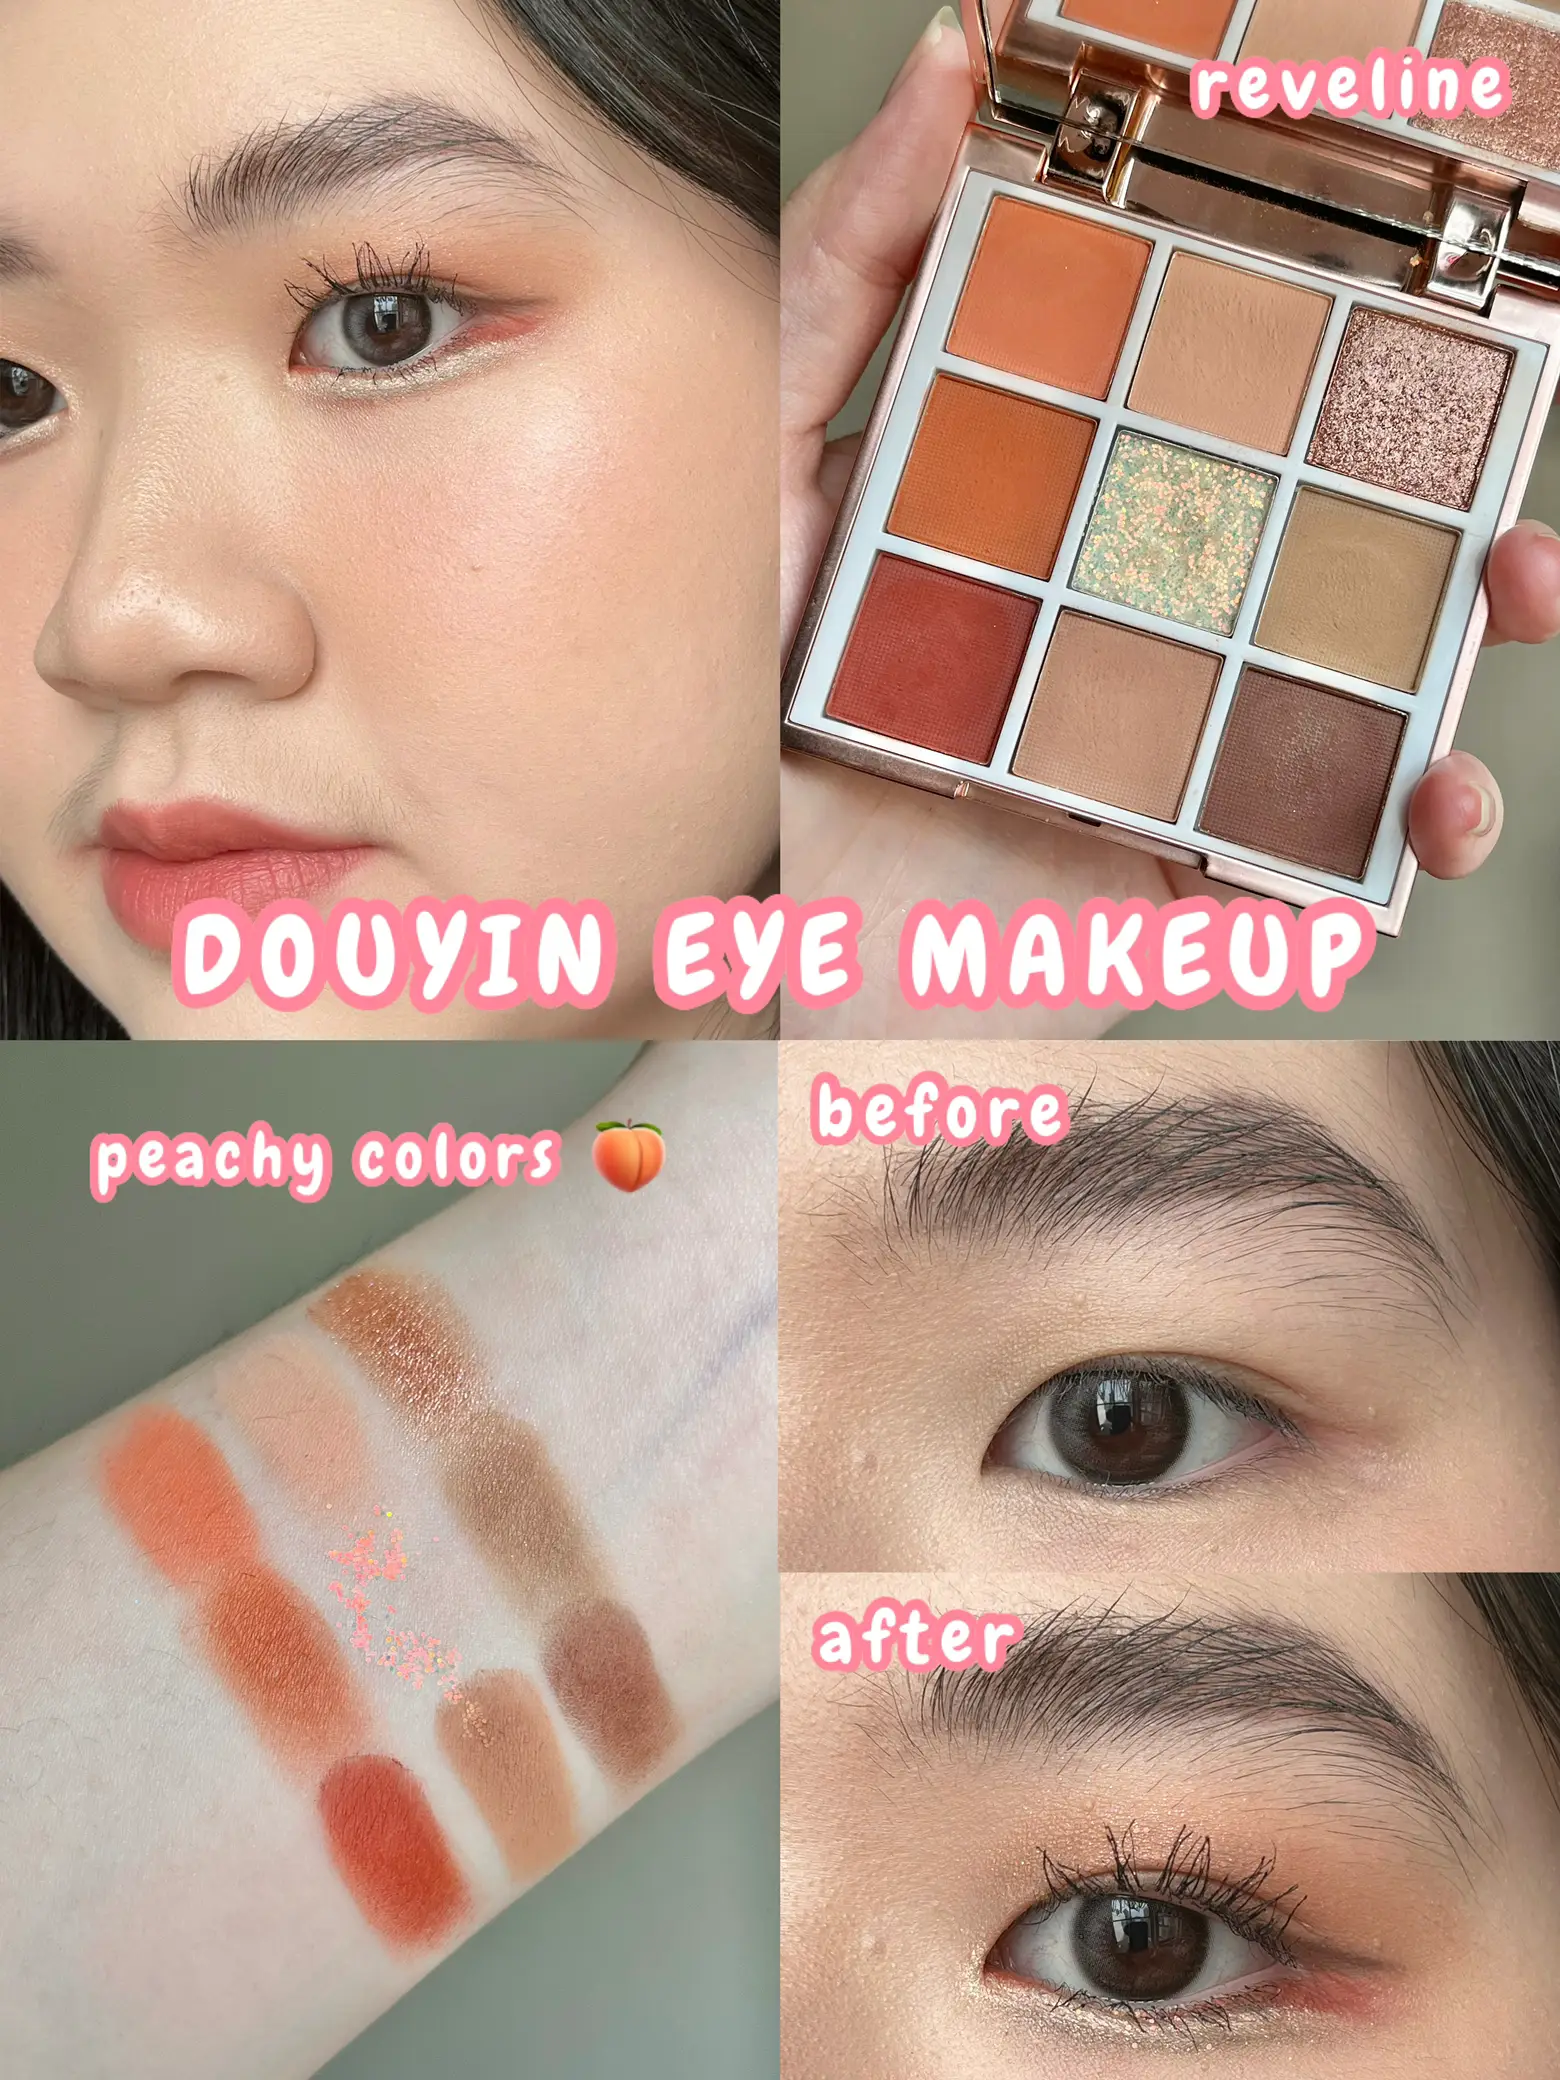 Doll eyes makeup tutorial for round eyes 